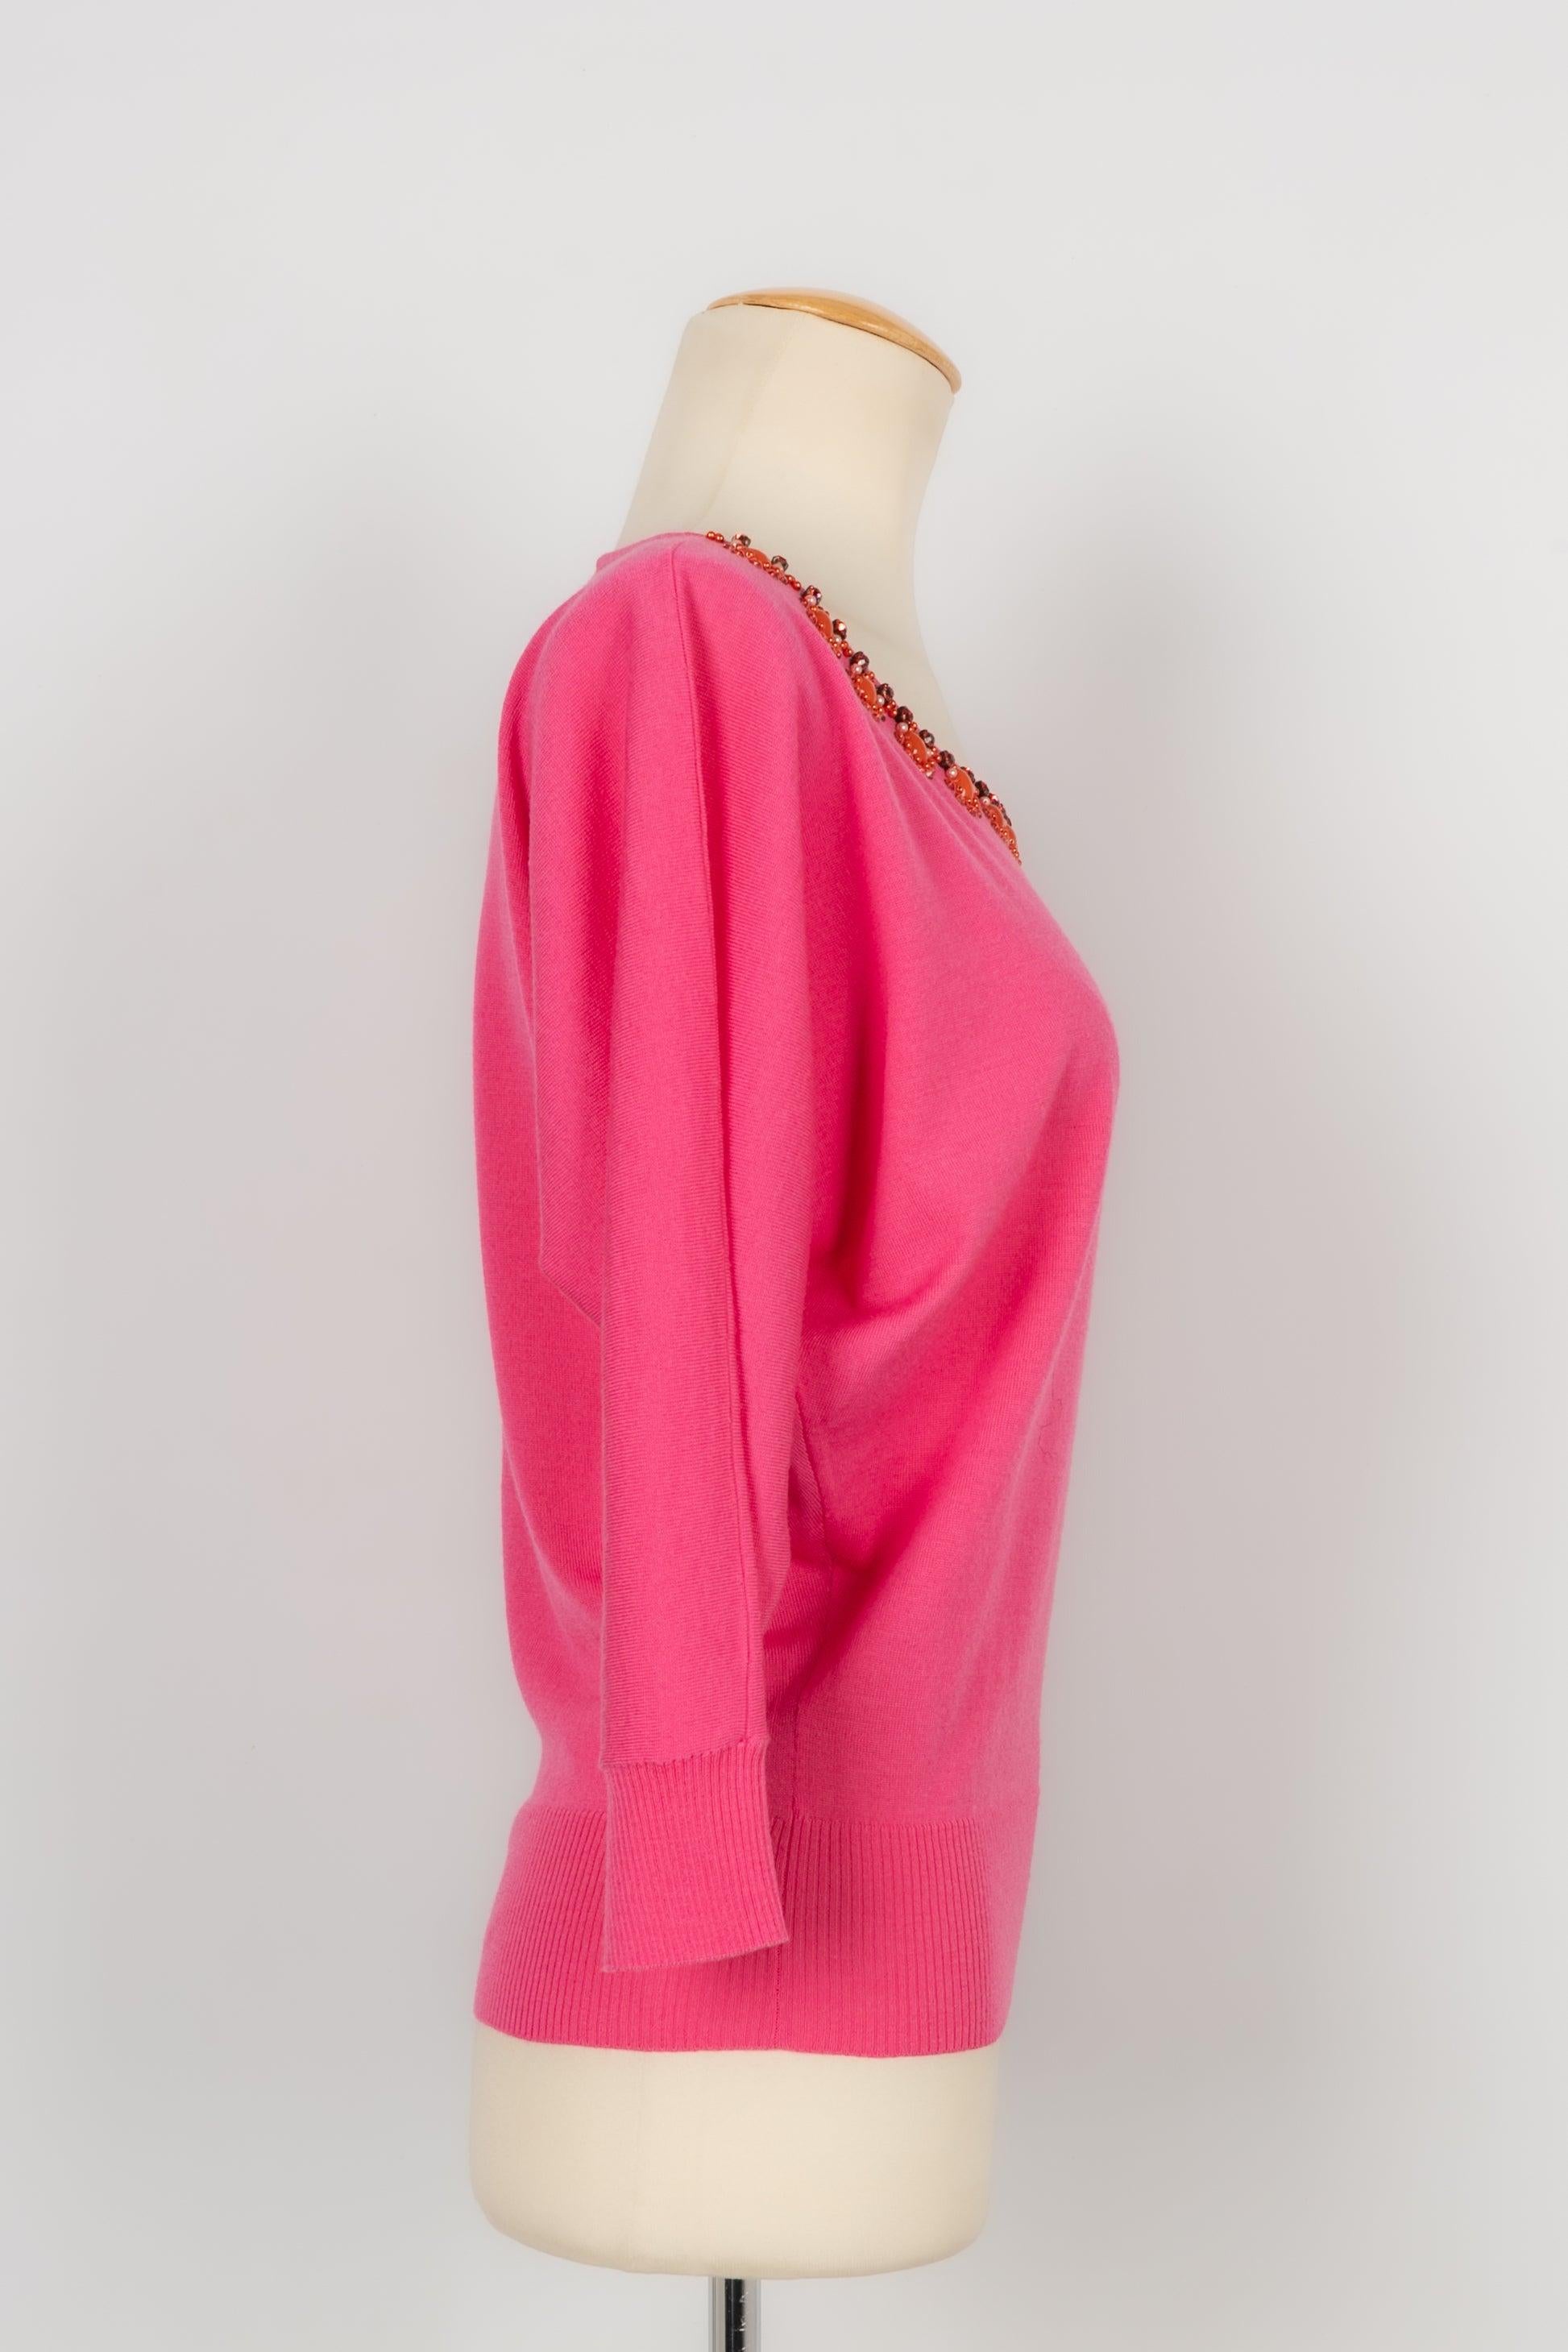 Dior - (Made in Italy) Pink wool tiny sweater, collar embroidered with rhinestones and cabochons. Size 40FR. 2008 Cruise Collection under the artistic direction of John Galliano.

Additional information:
Condition: Very good condition
Dimensions: